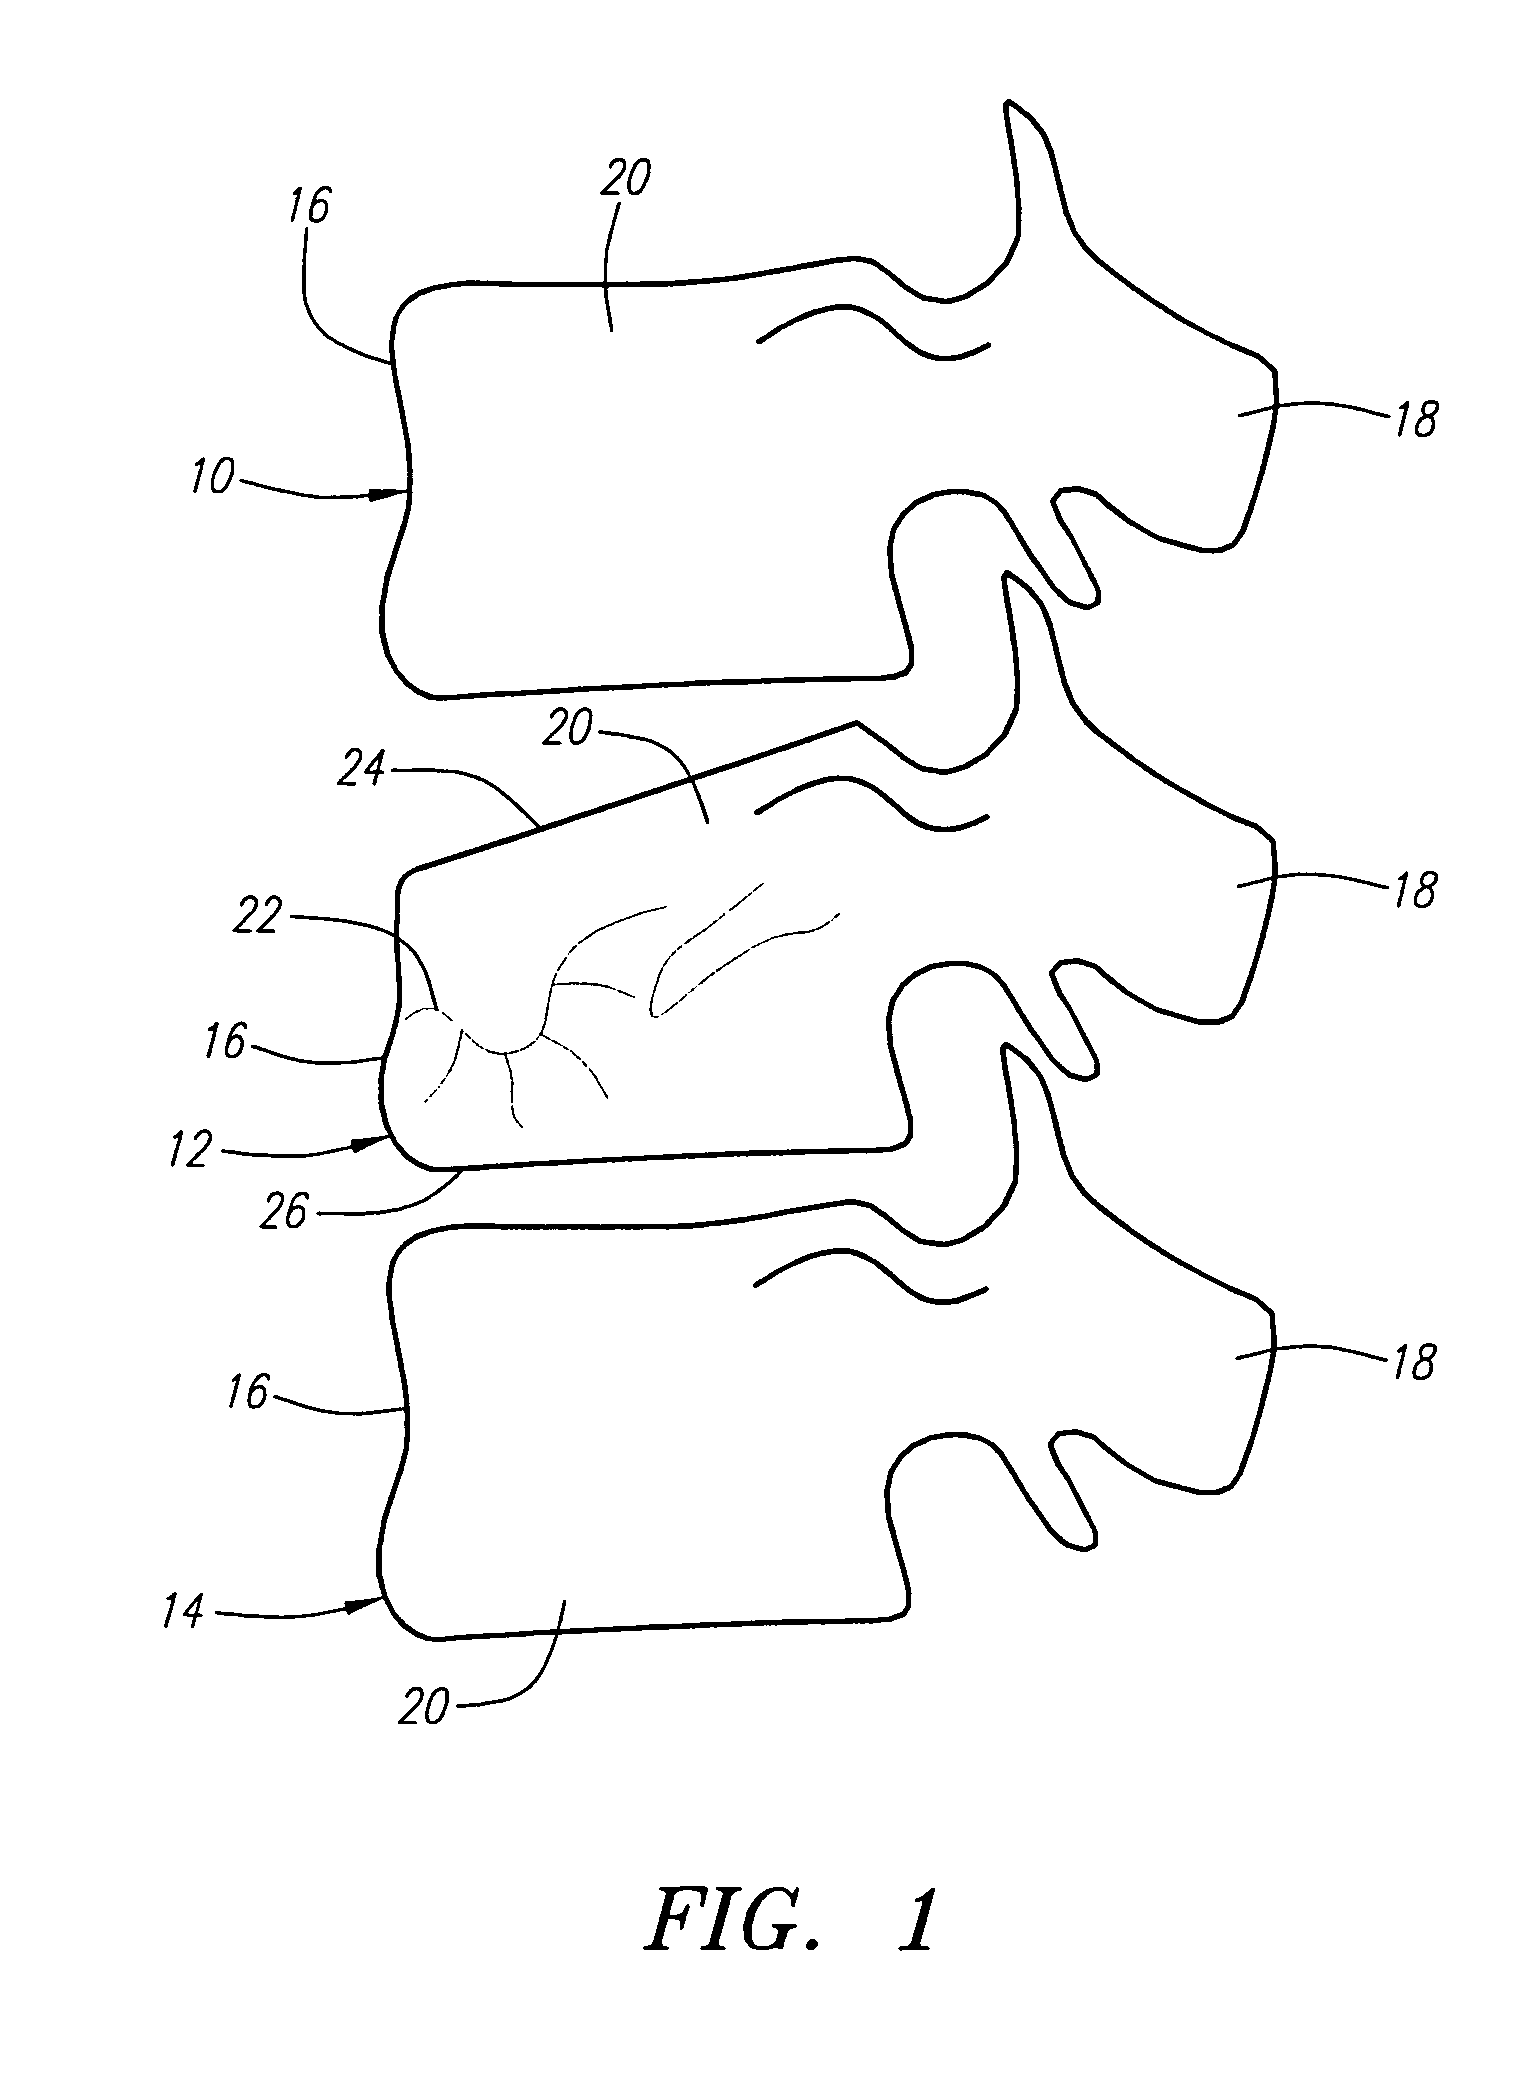 Methods for reducing bone compression fractures using wedges